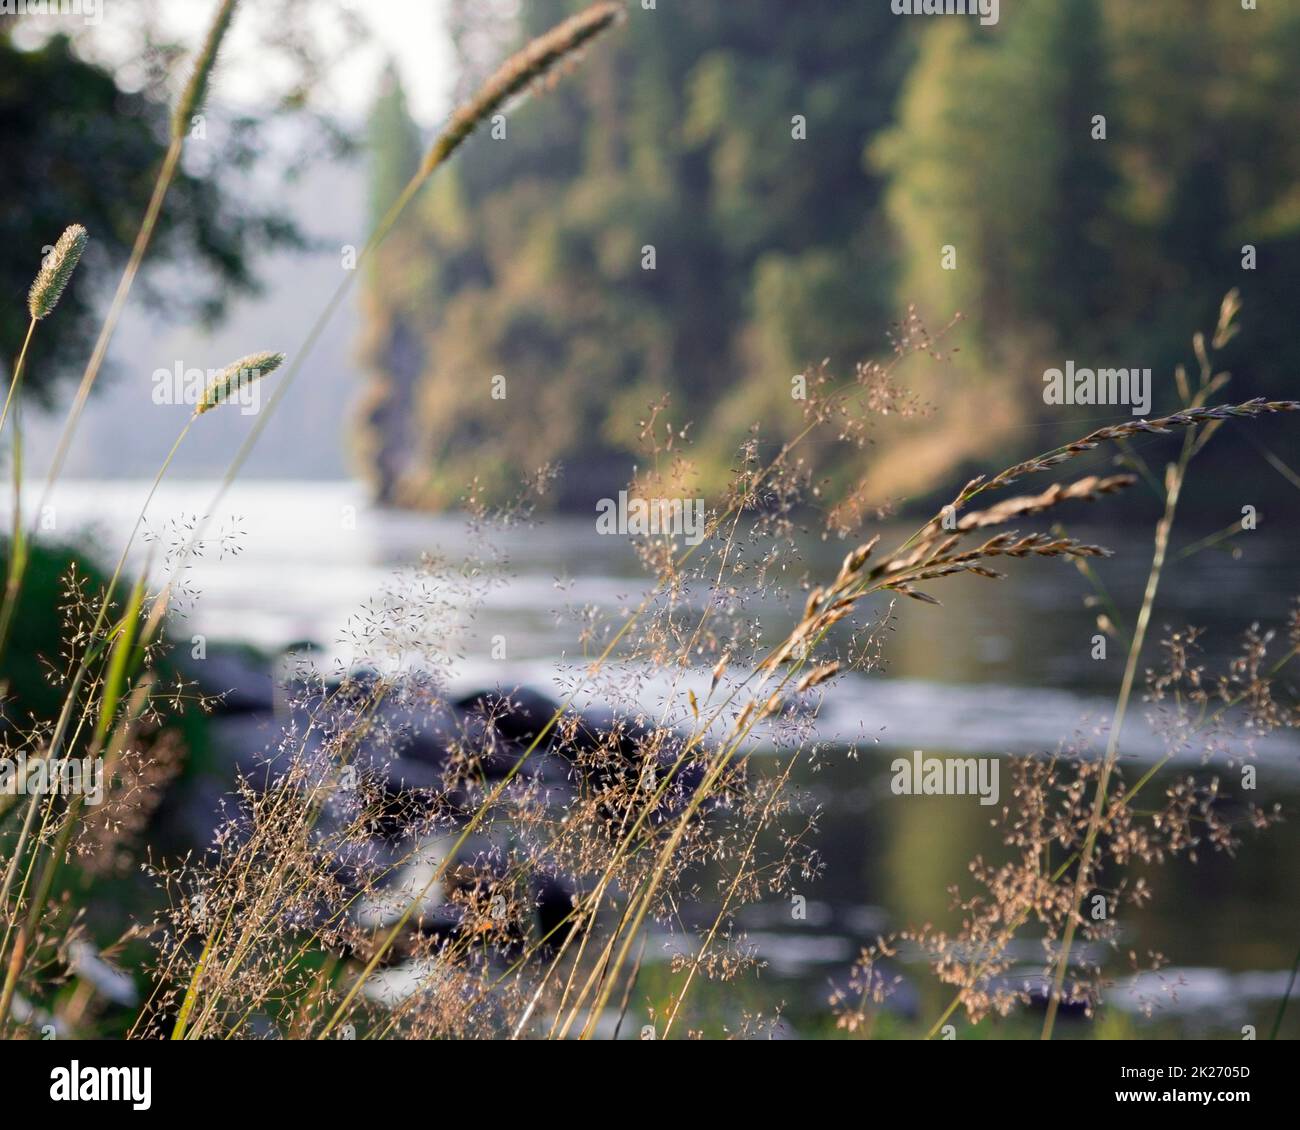 The landscape with wild grass on foreground and river on the background Stock Photo